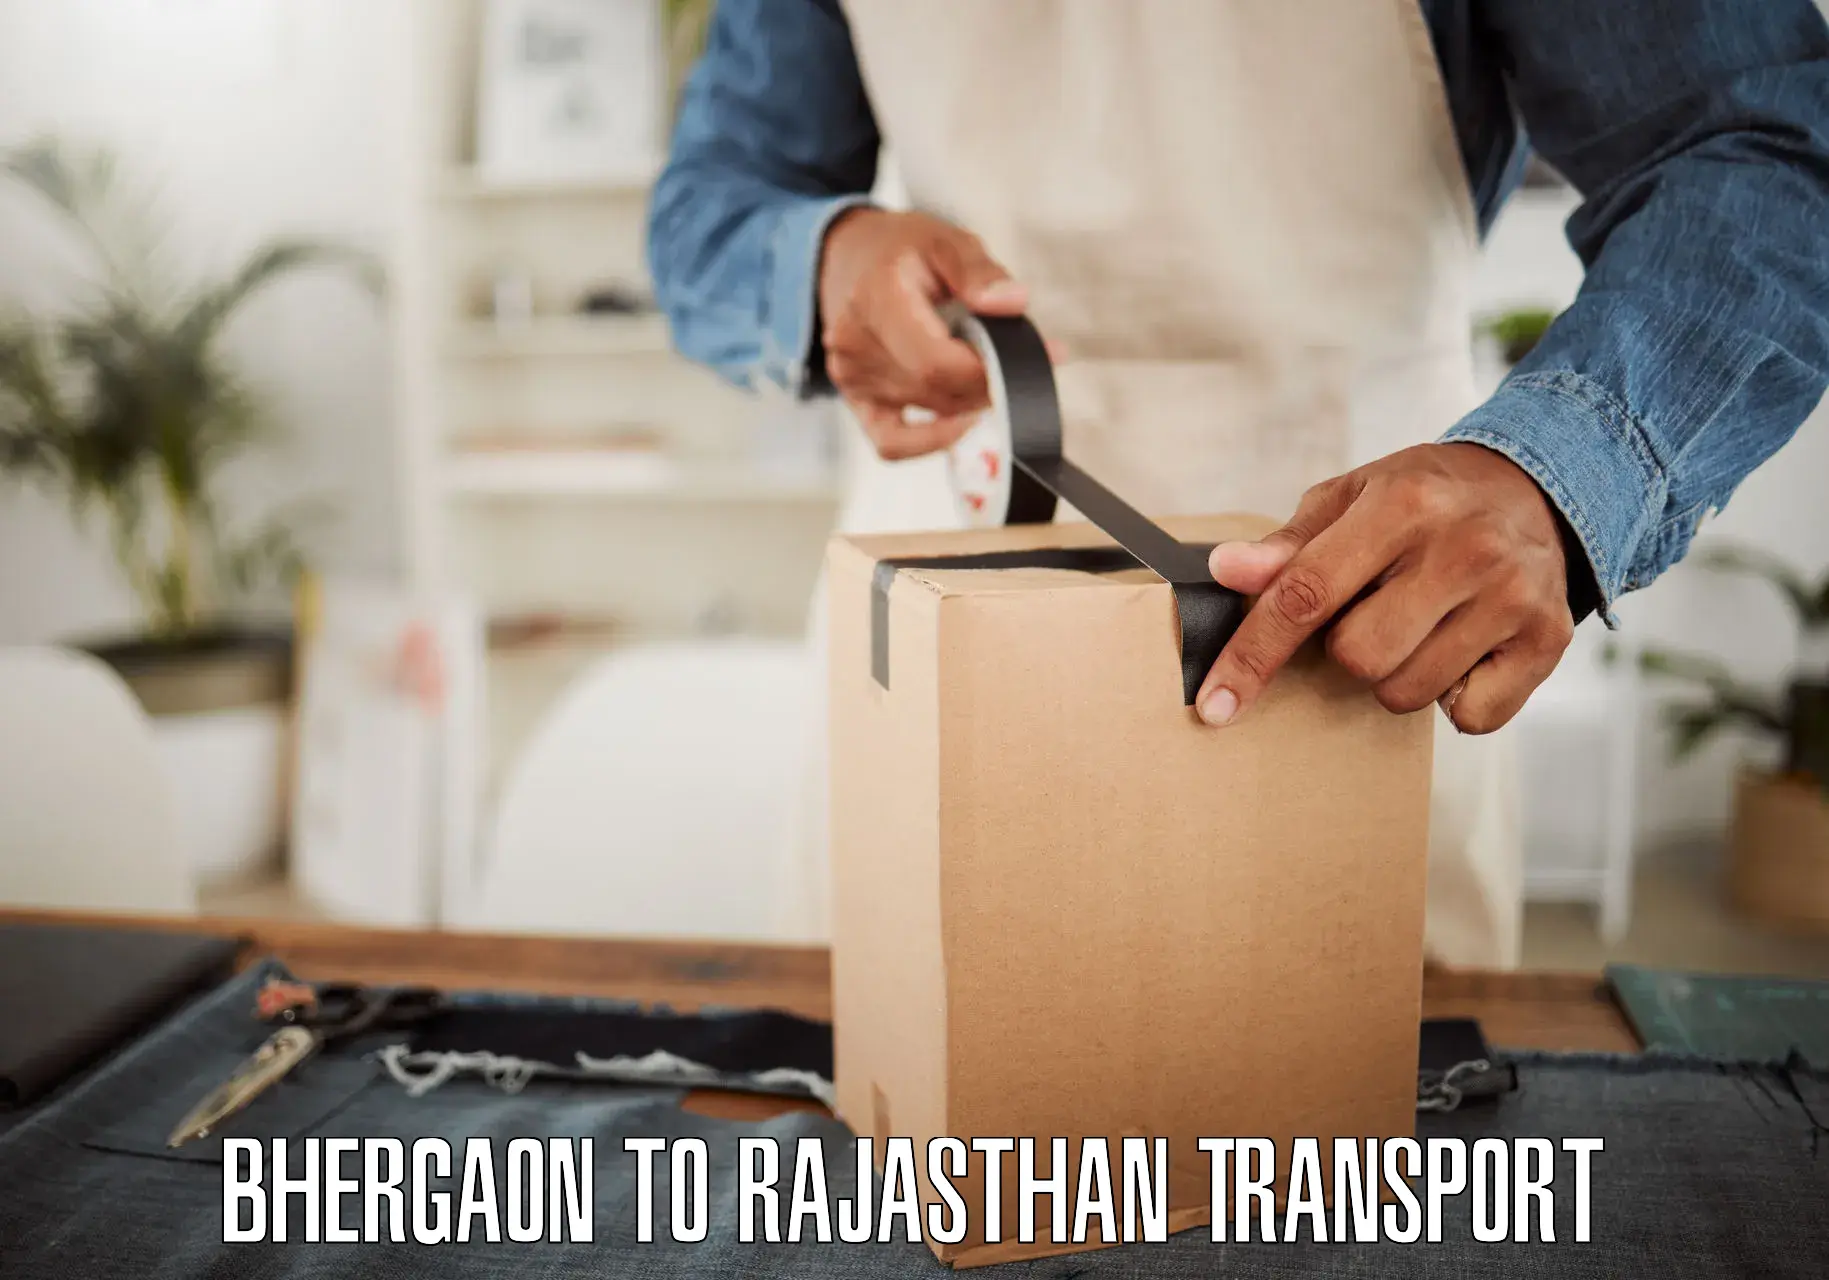 Commercial transport service Bhergaon to Rajasthan